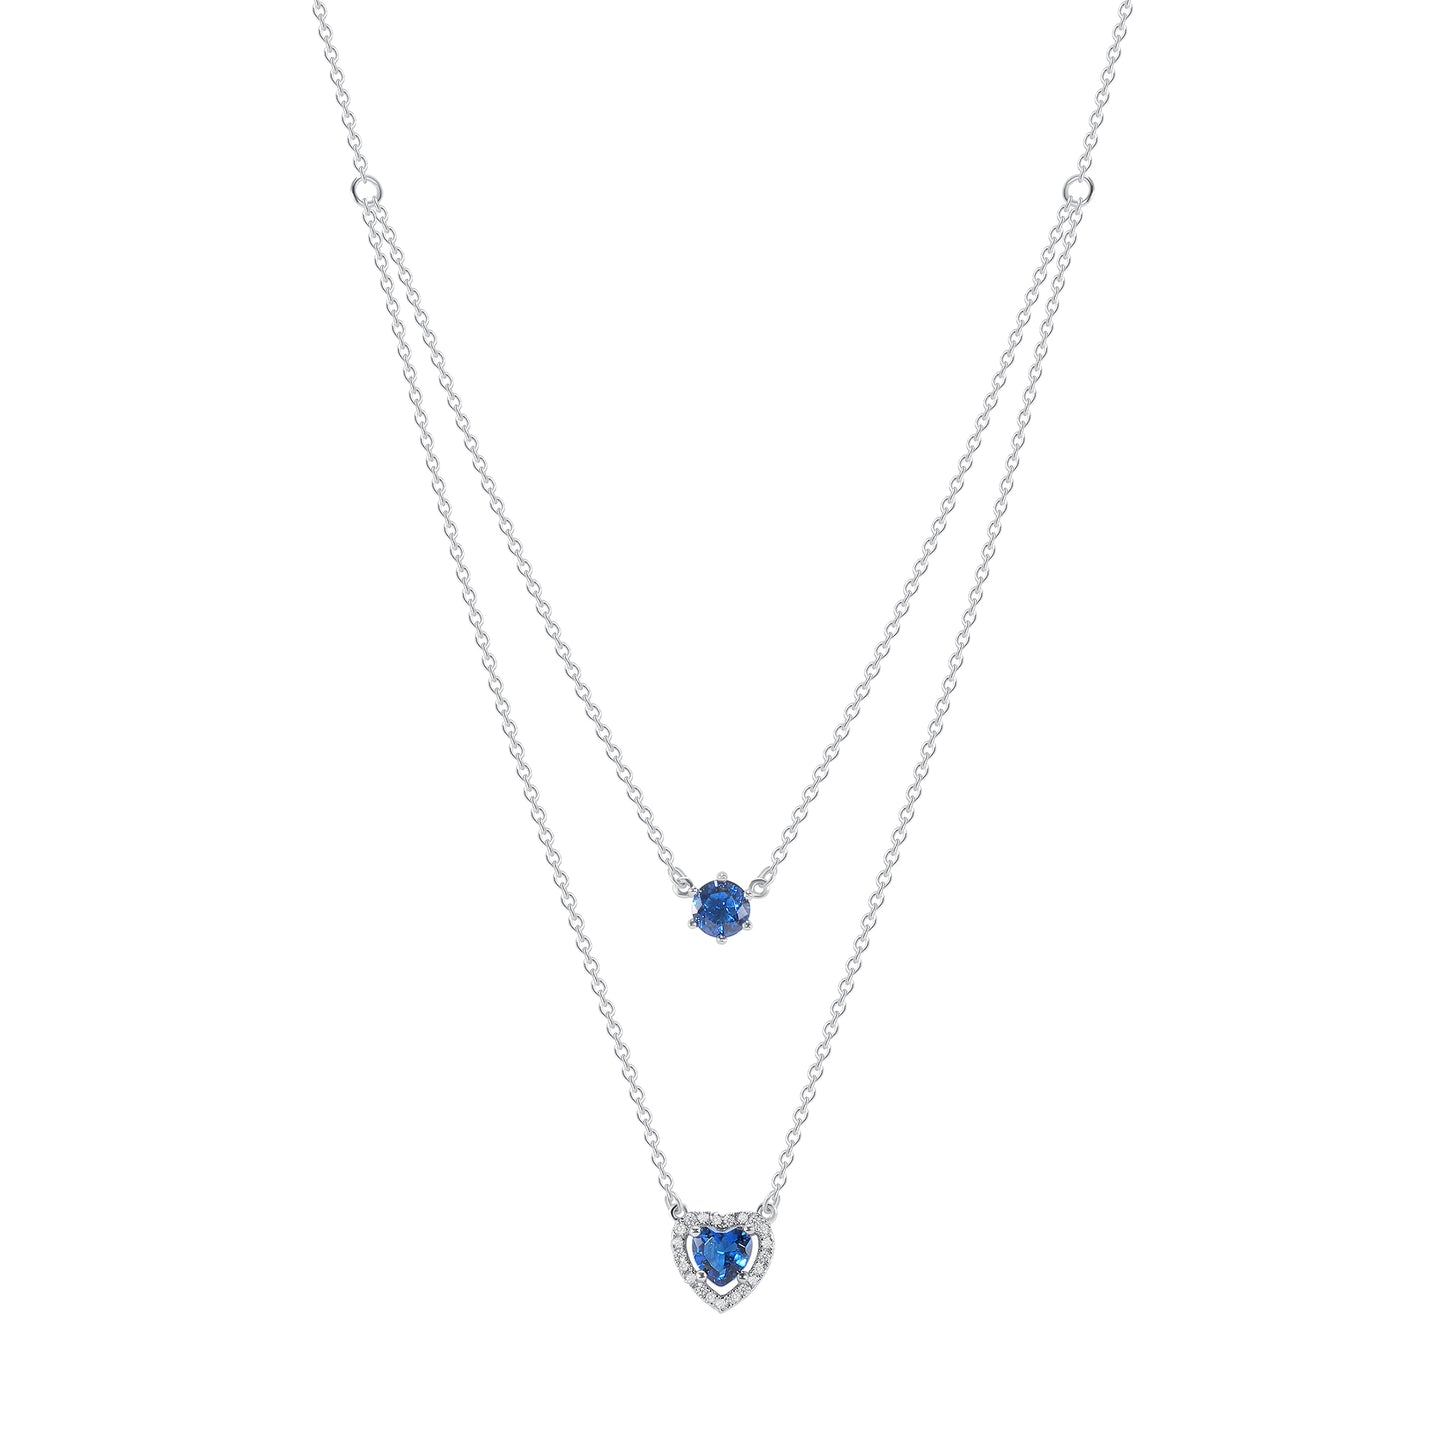 Silver 925 Rhodium Plated Cubic Zirconia Blue Sapphire Double Row Necklace. BN3357BLU